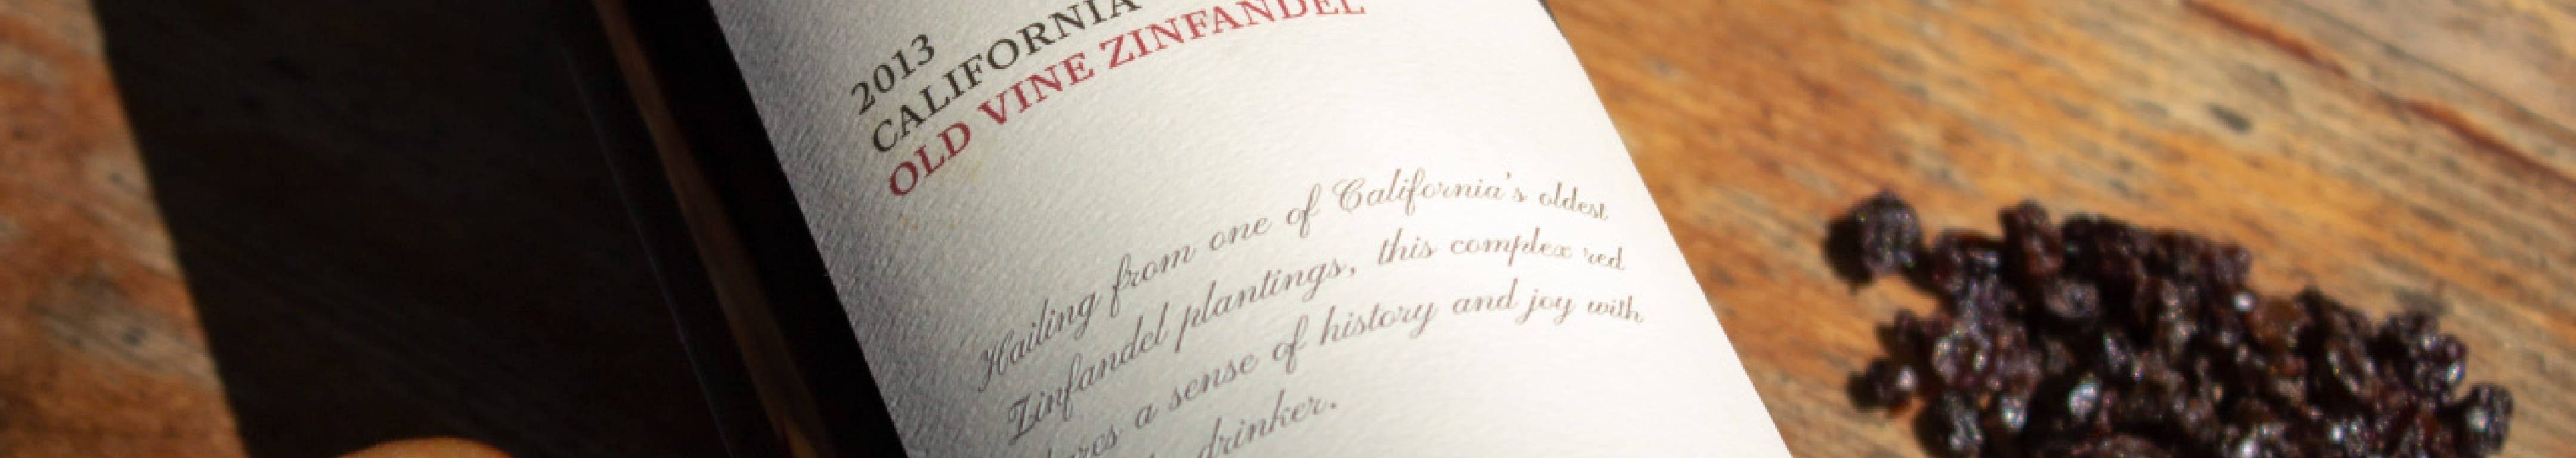 Zinfandel is loved for its place as an elegant, hearty red wine with a wonderful pour. It is regarded as California’s heritage grape varietal, with the first ones being planted around the 1850s.